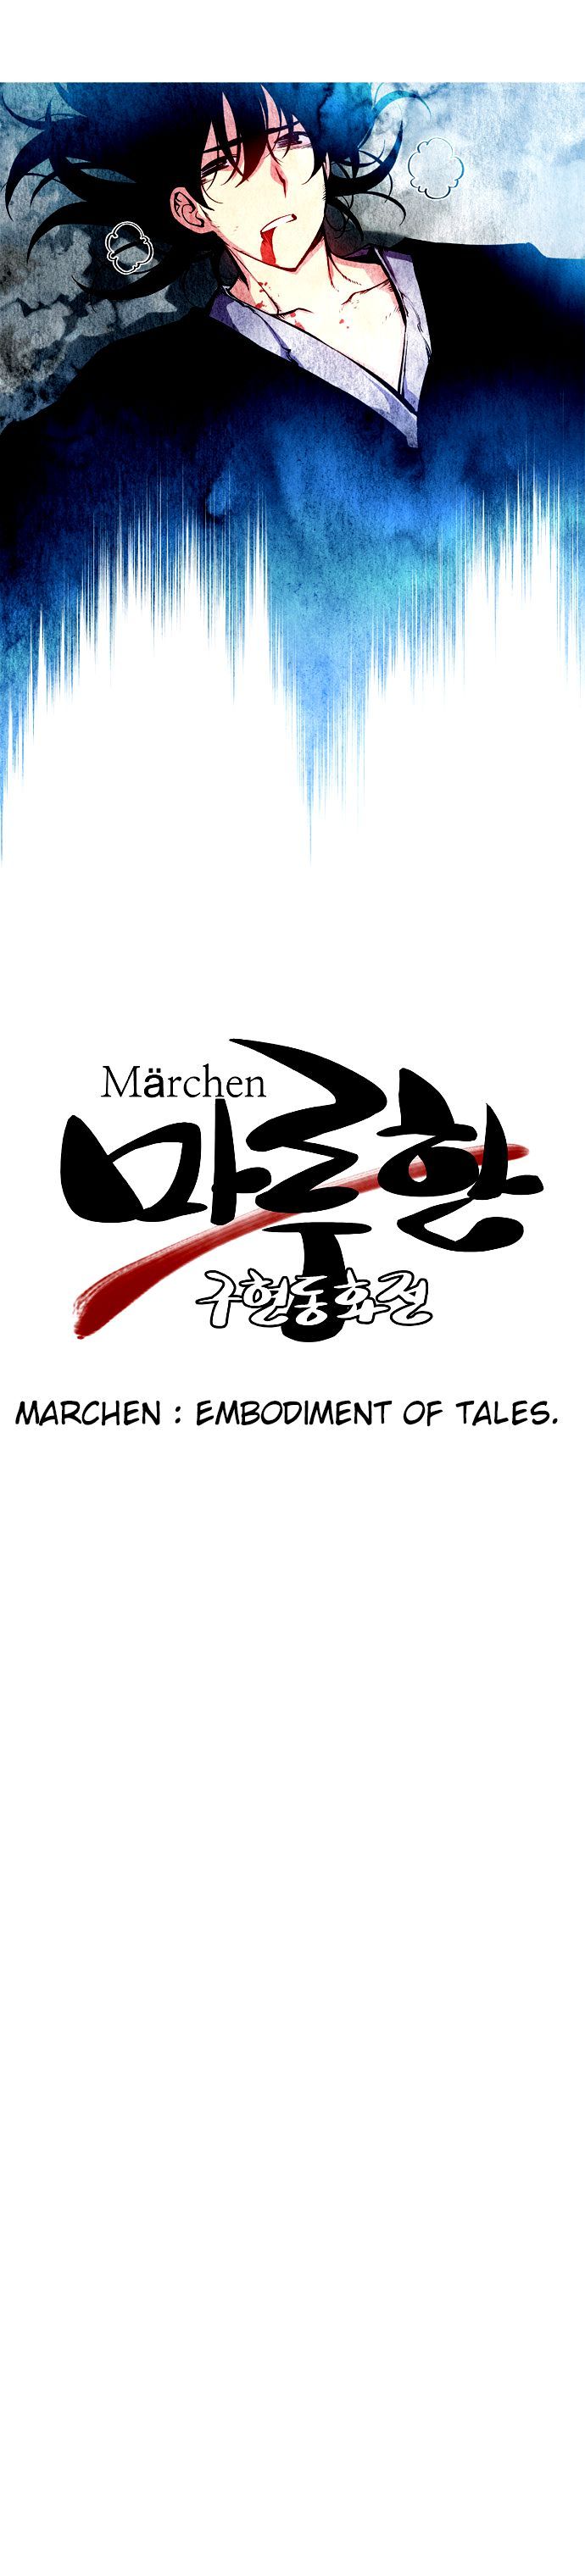 Marchen - The Embodiment of Tales Chapter 001 page 3